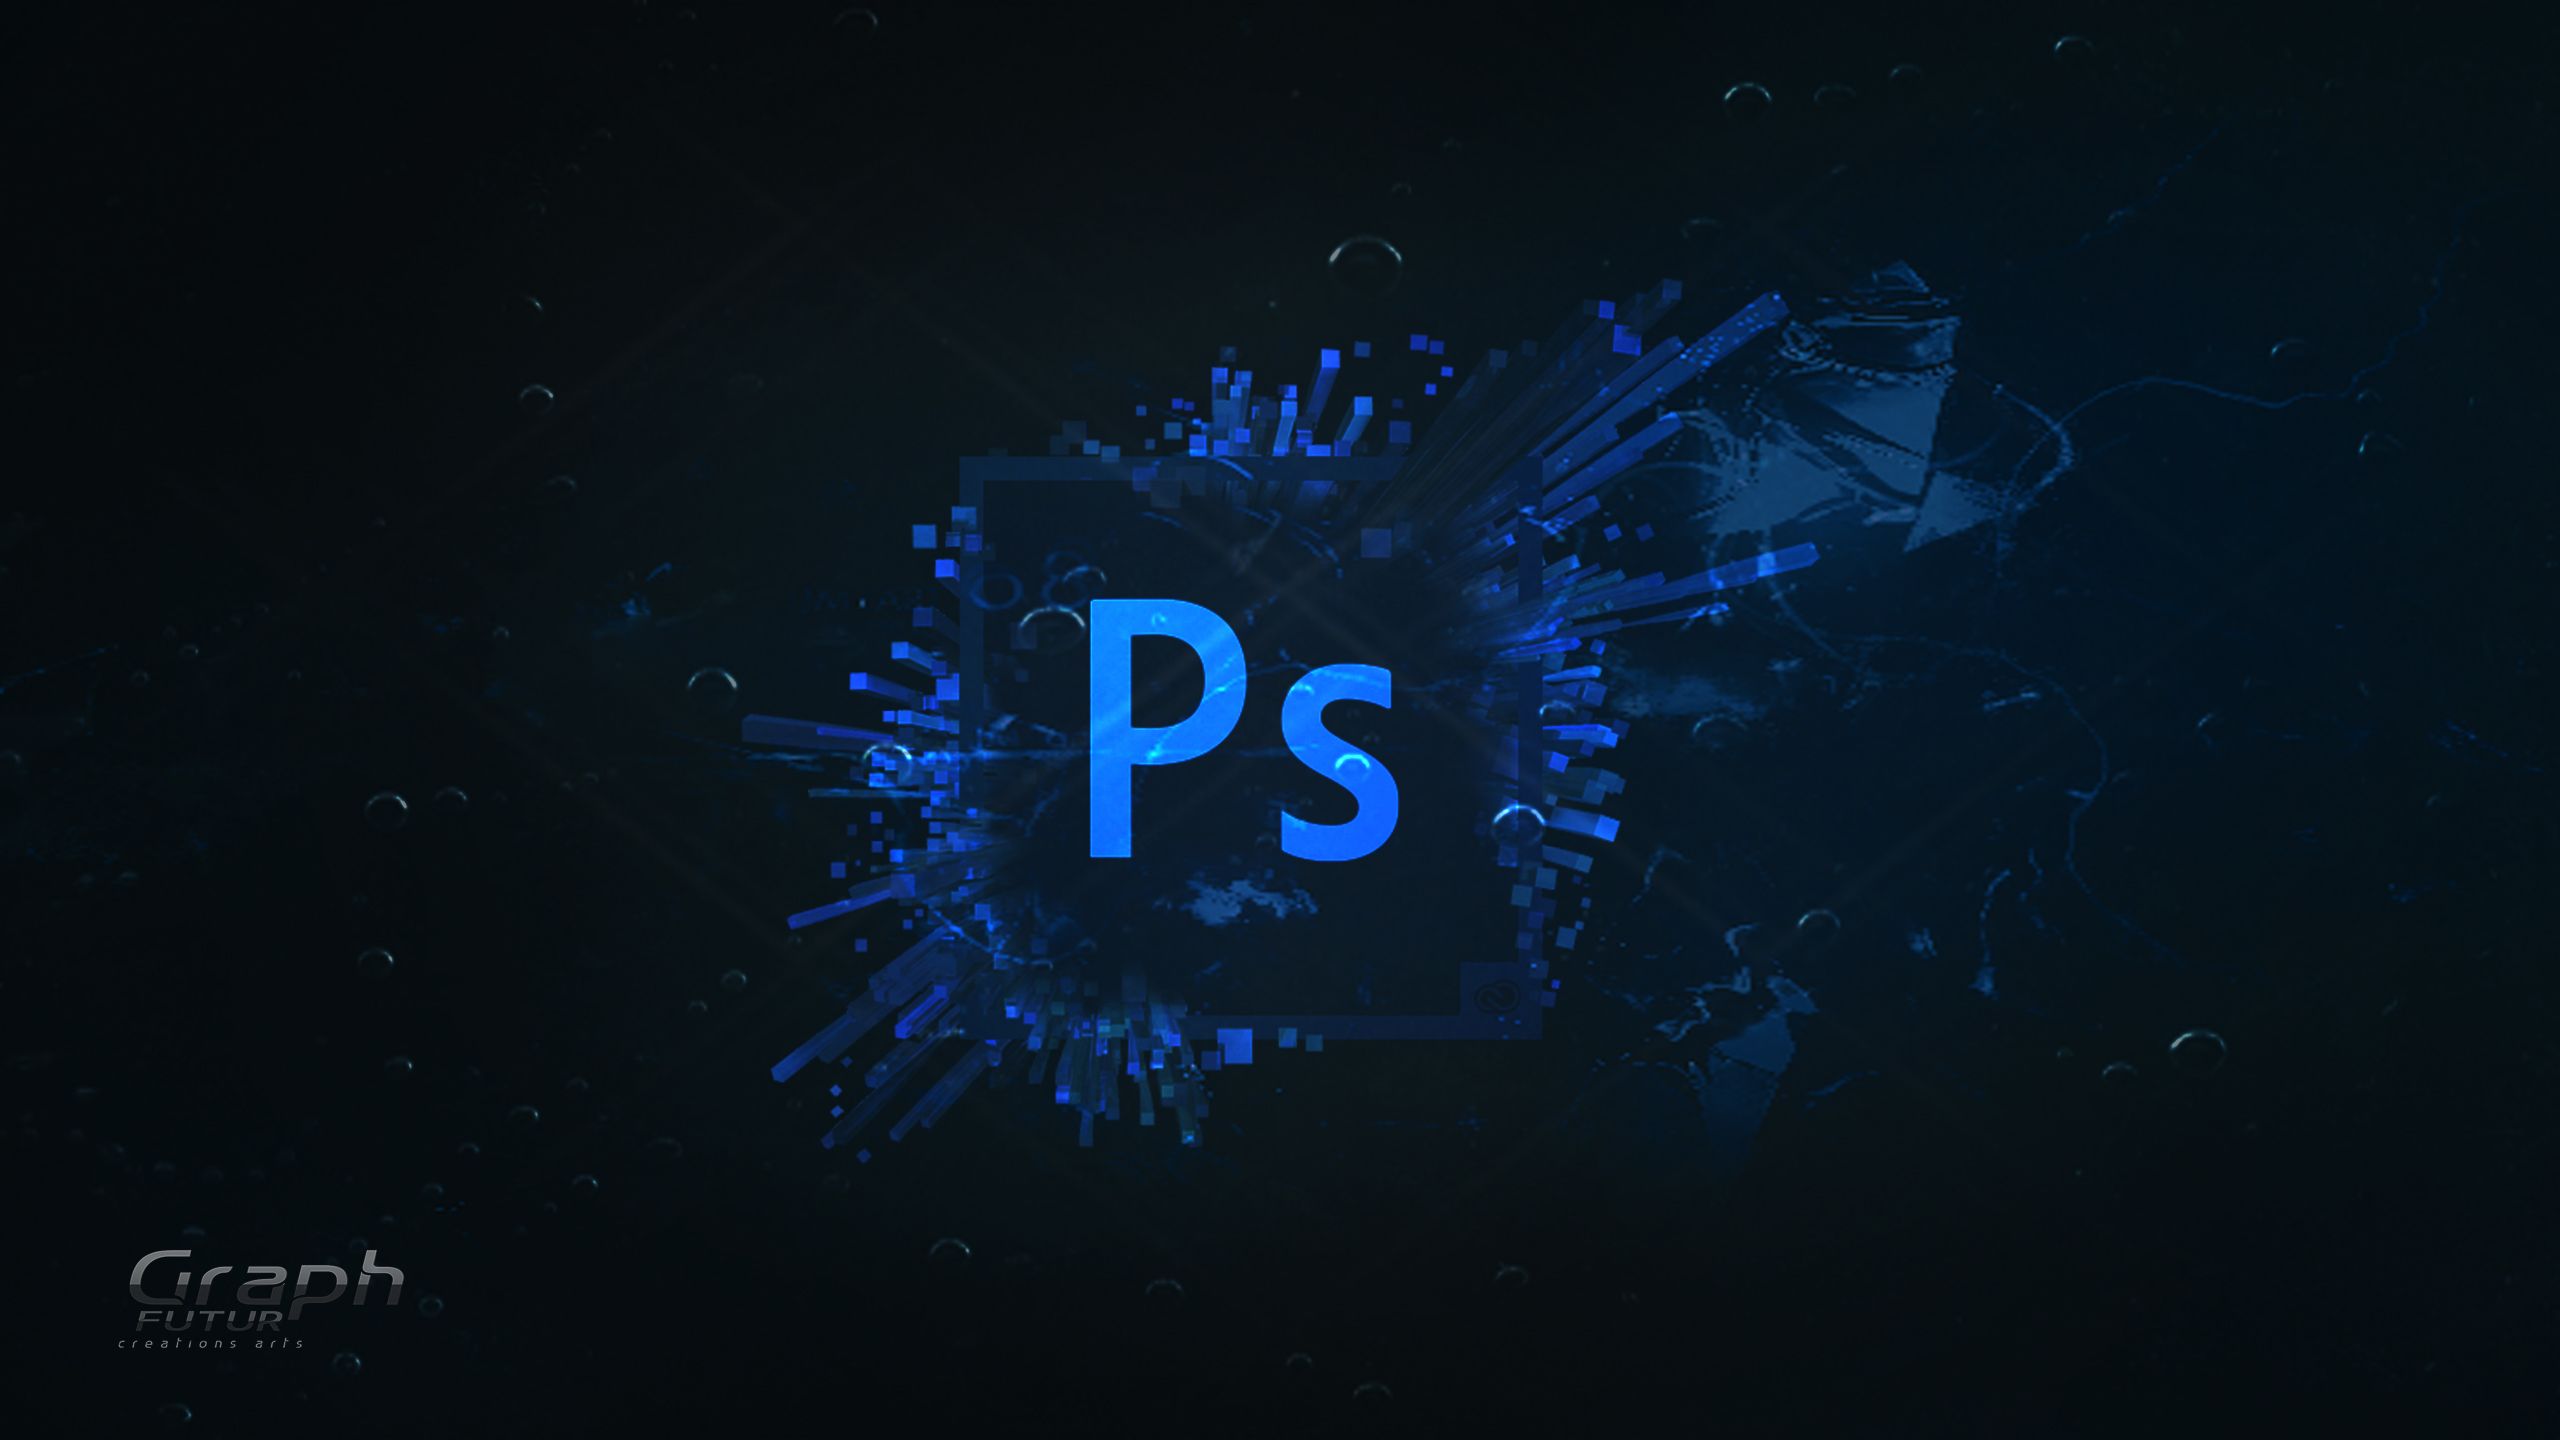 adobe photoshop wallpaper backgrounds free download